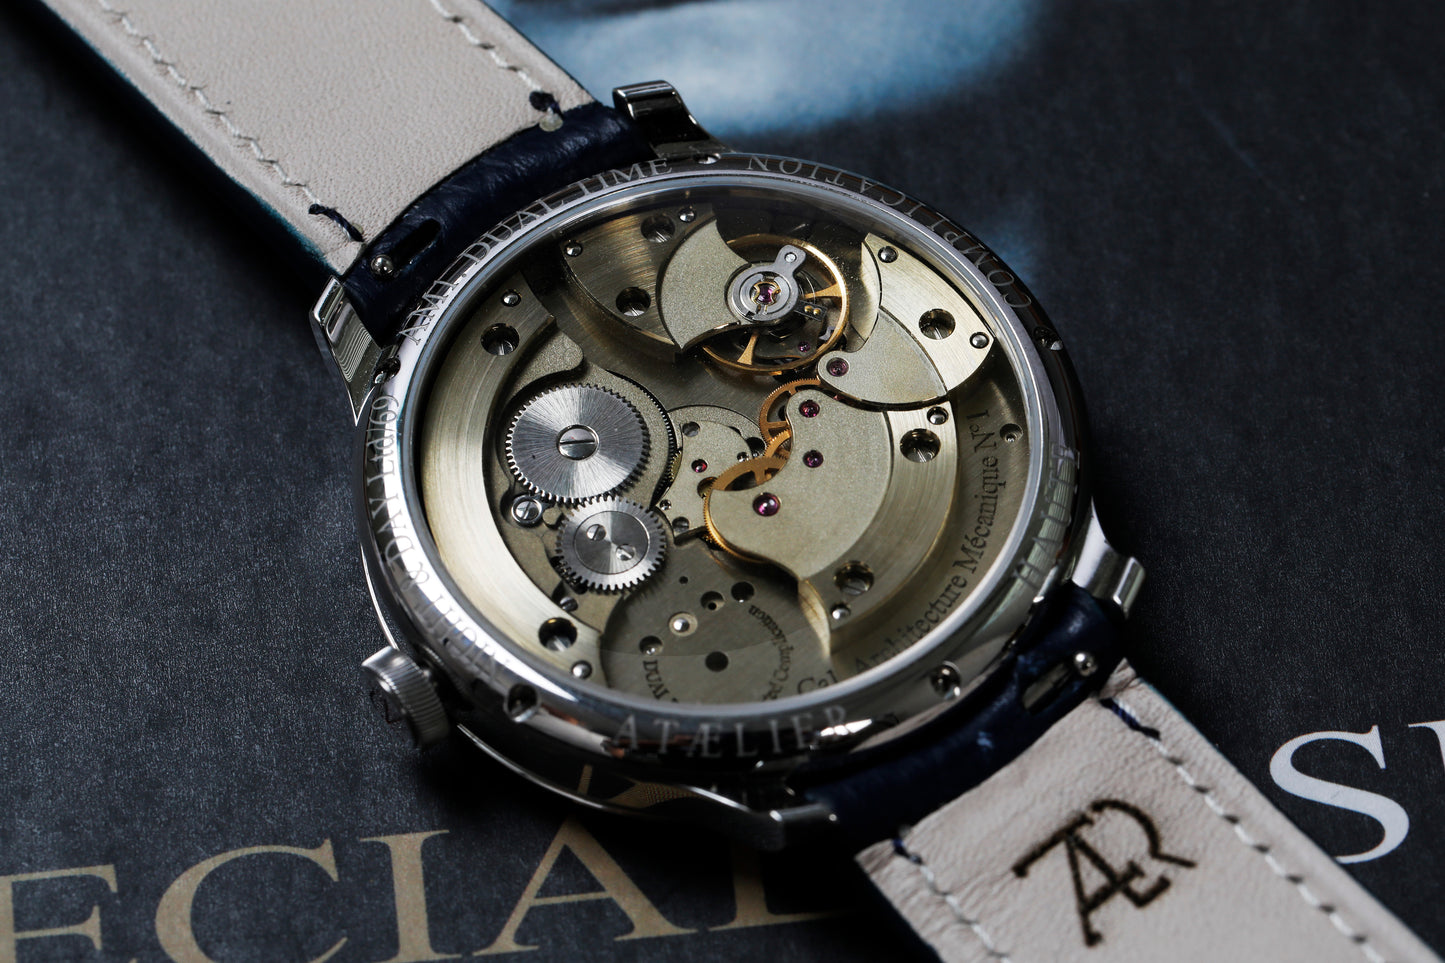 Ataelier Haute Complication "Dual Time" Day & Night